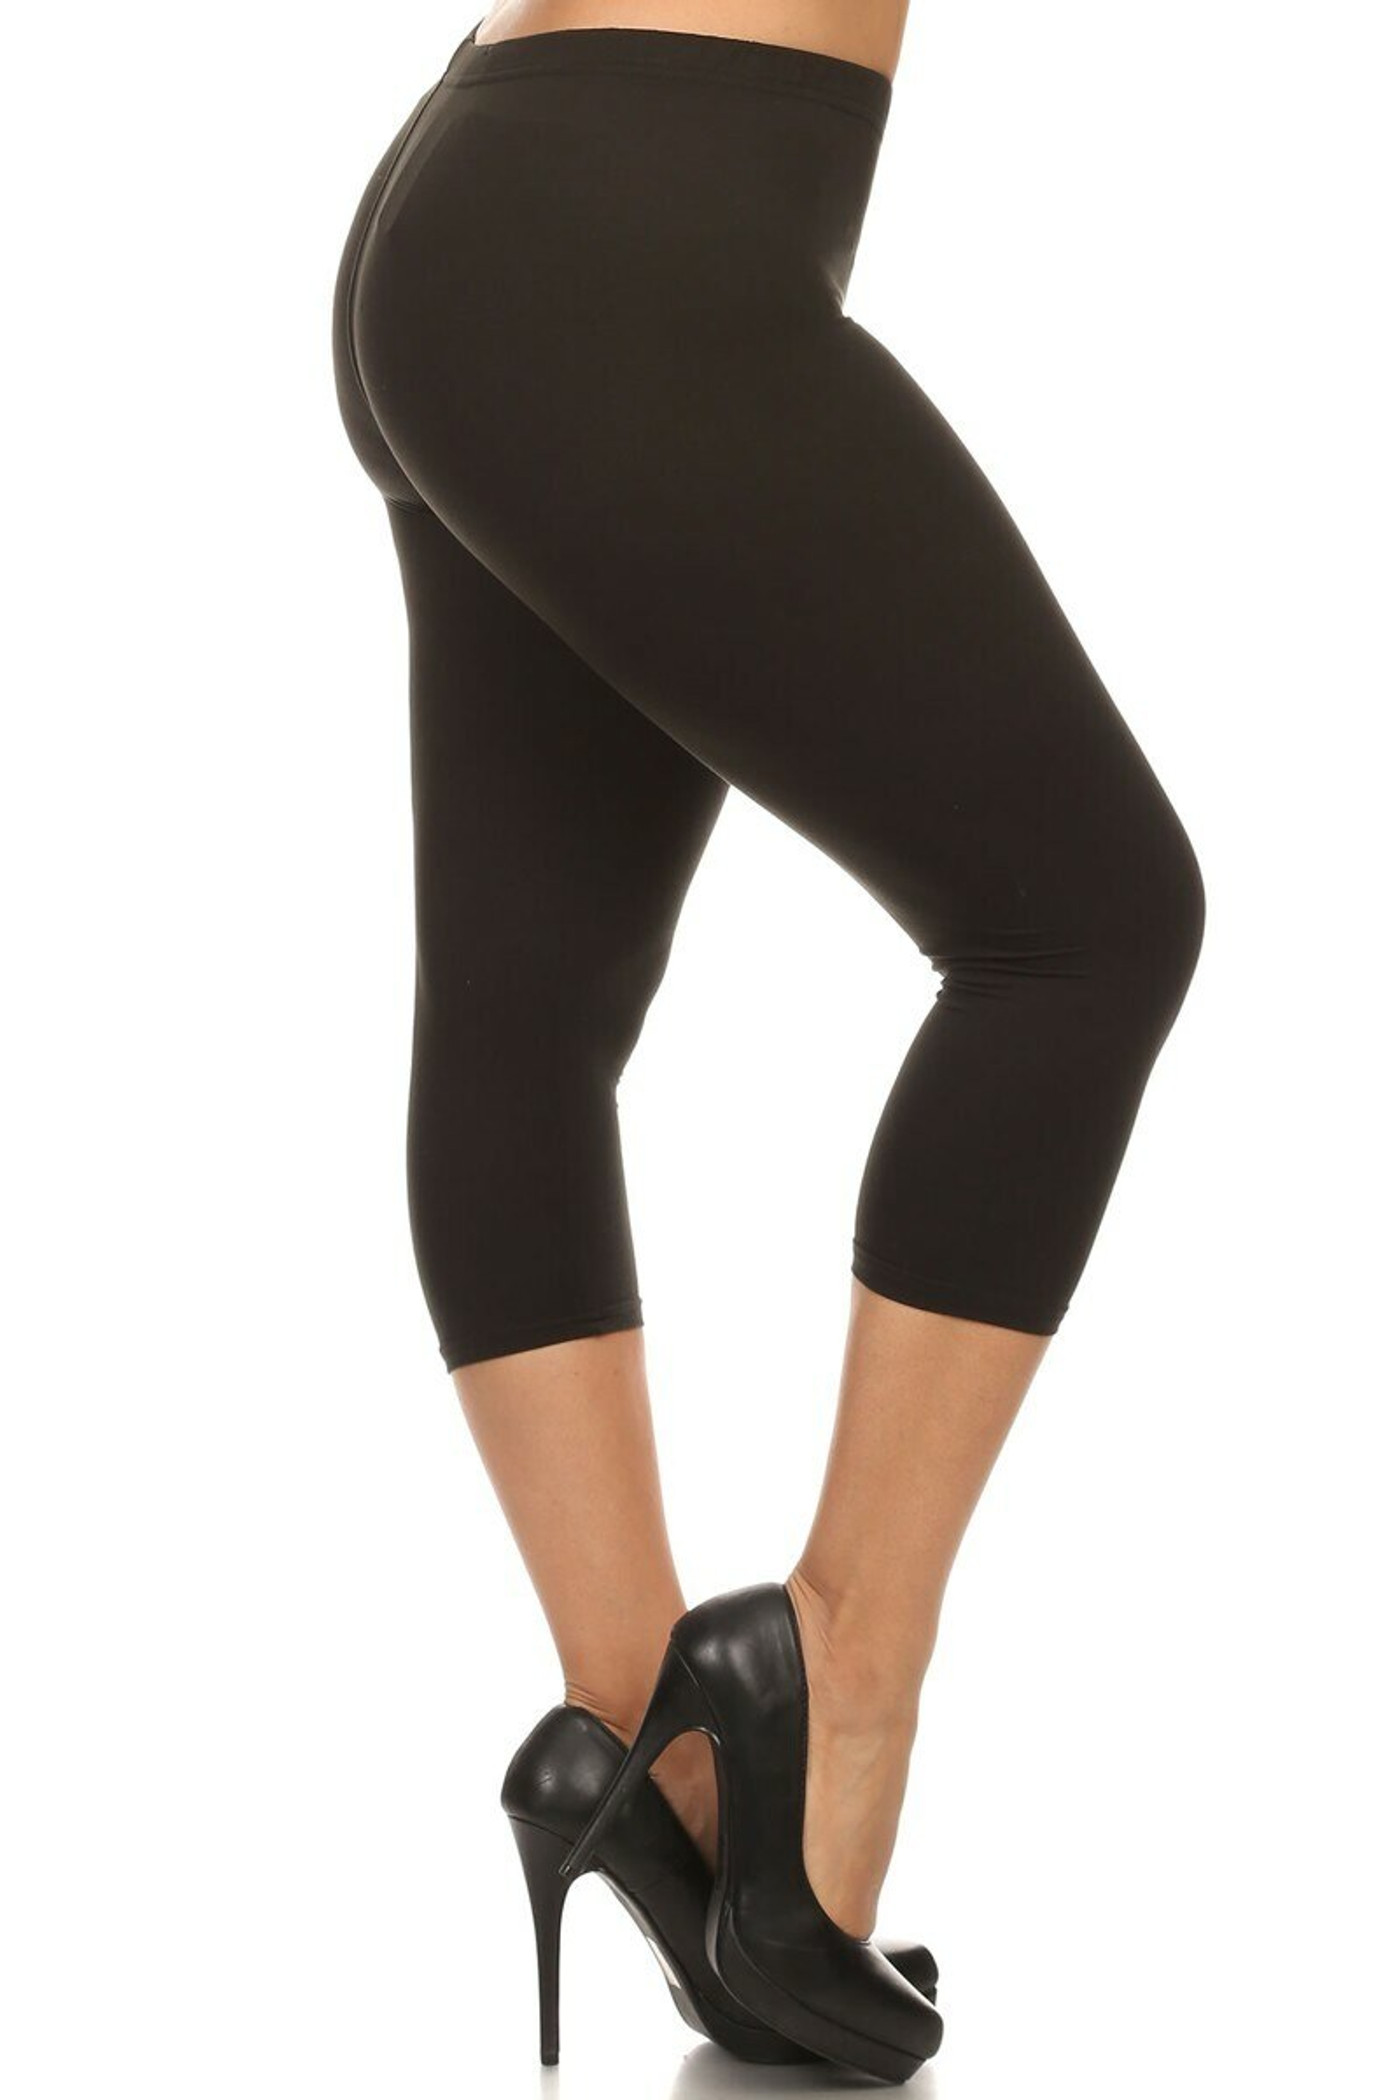 Right side of Black Buttery Smooth Solid Basic Extra Plus Size Capris - 3X-5X - New Mix